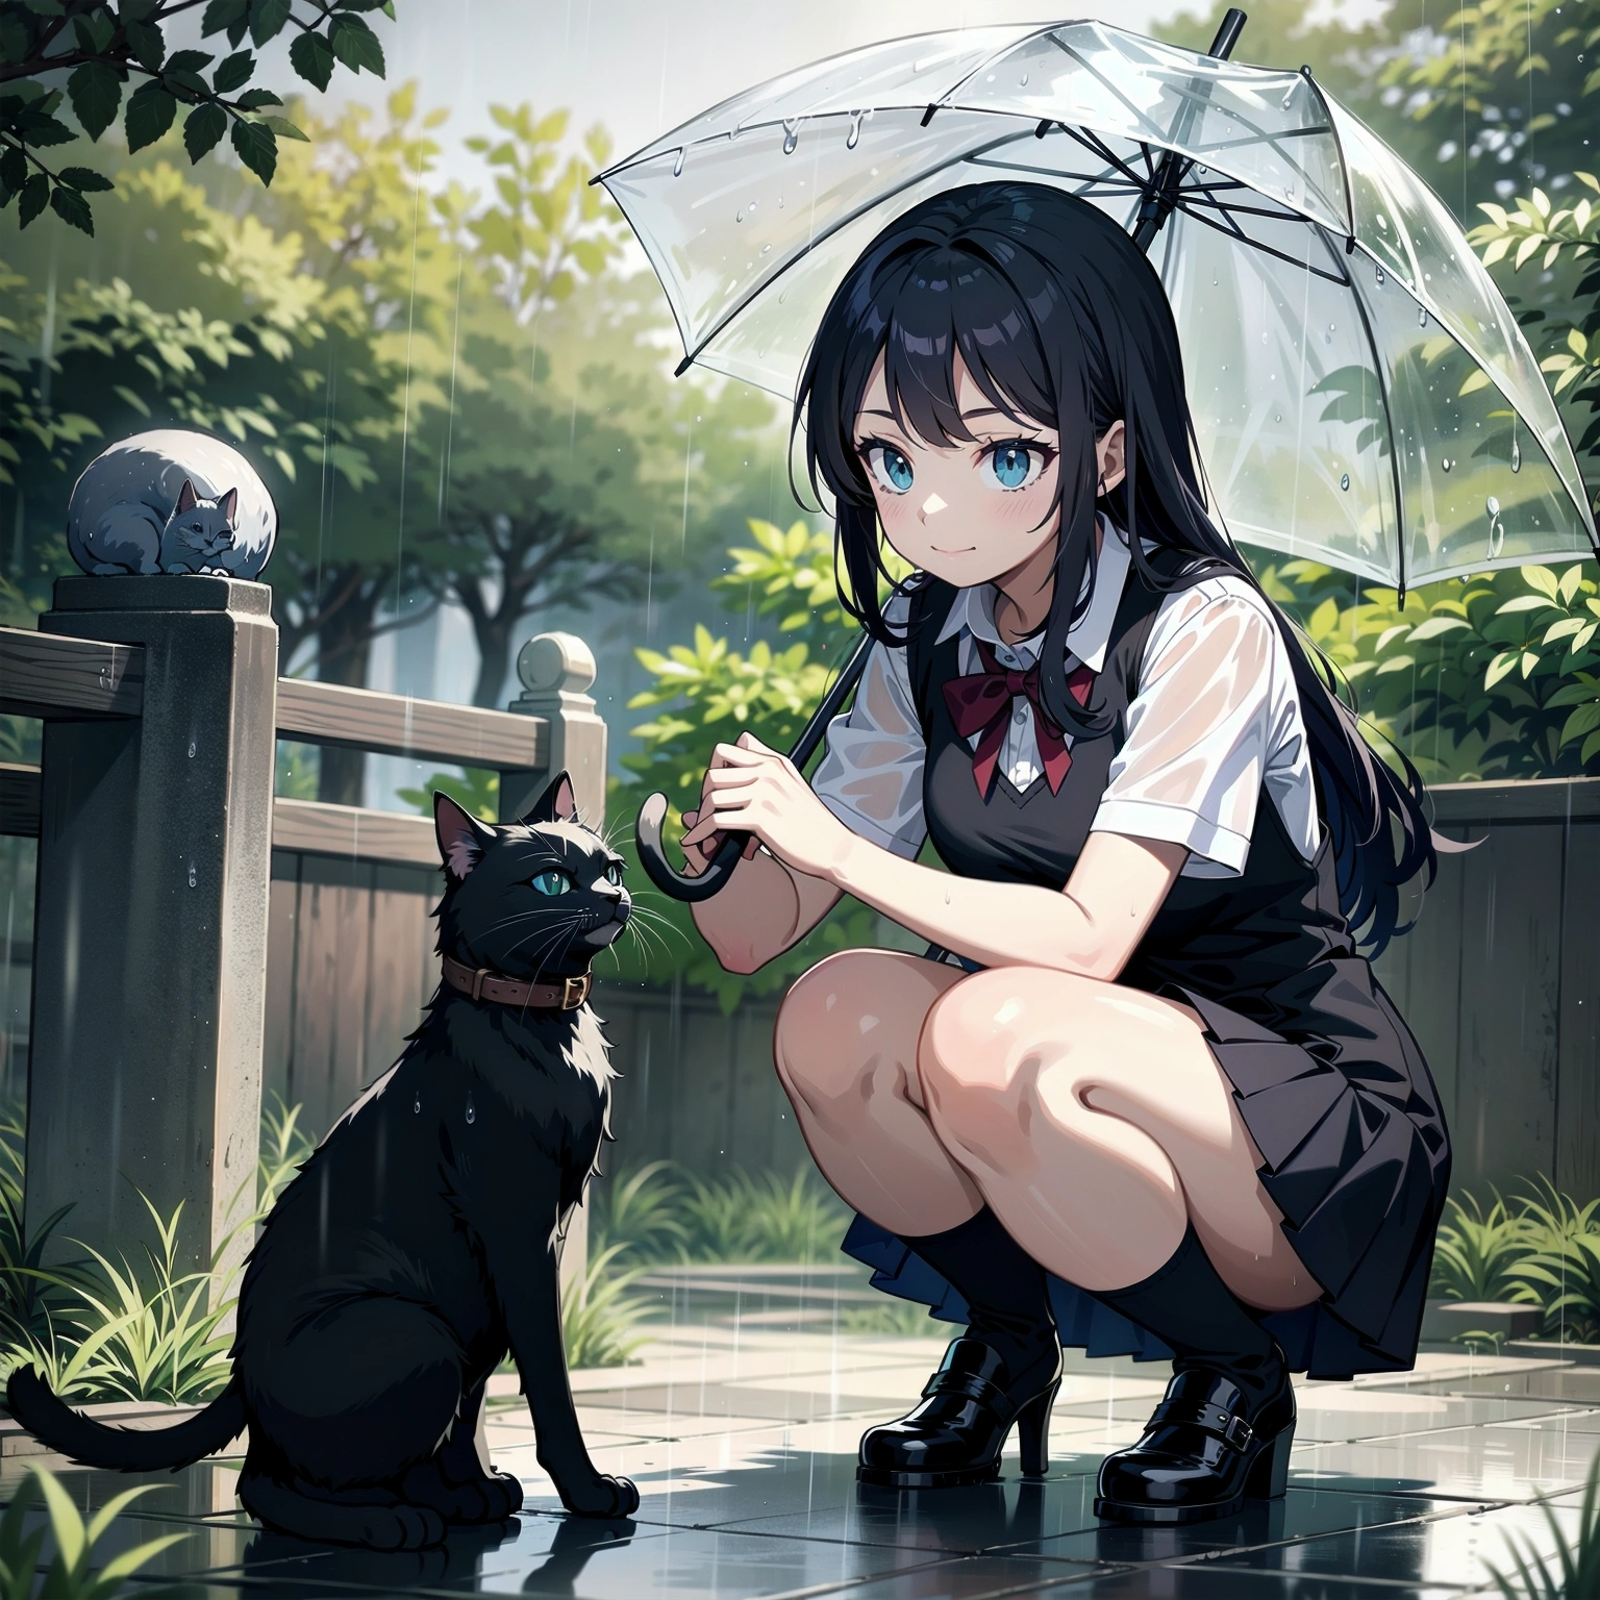 A girl holding an umbrella and petting a cat in the rain.